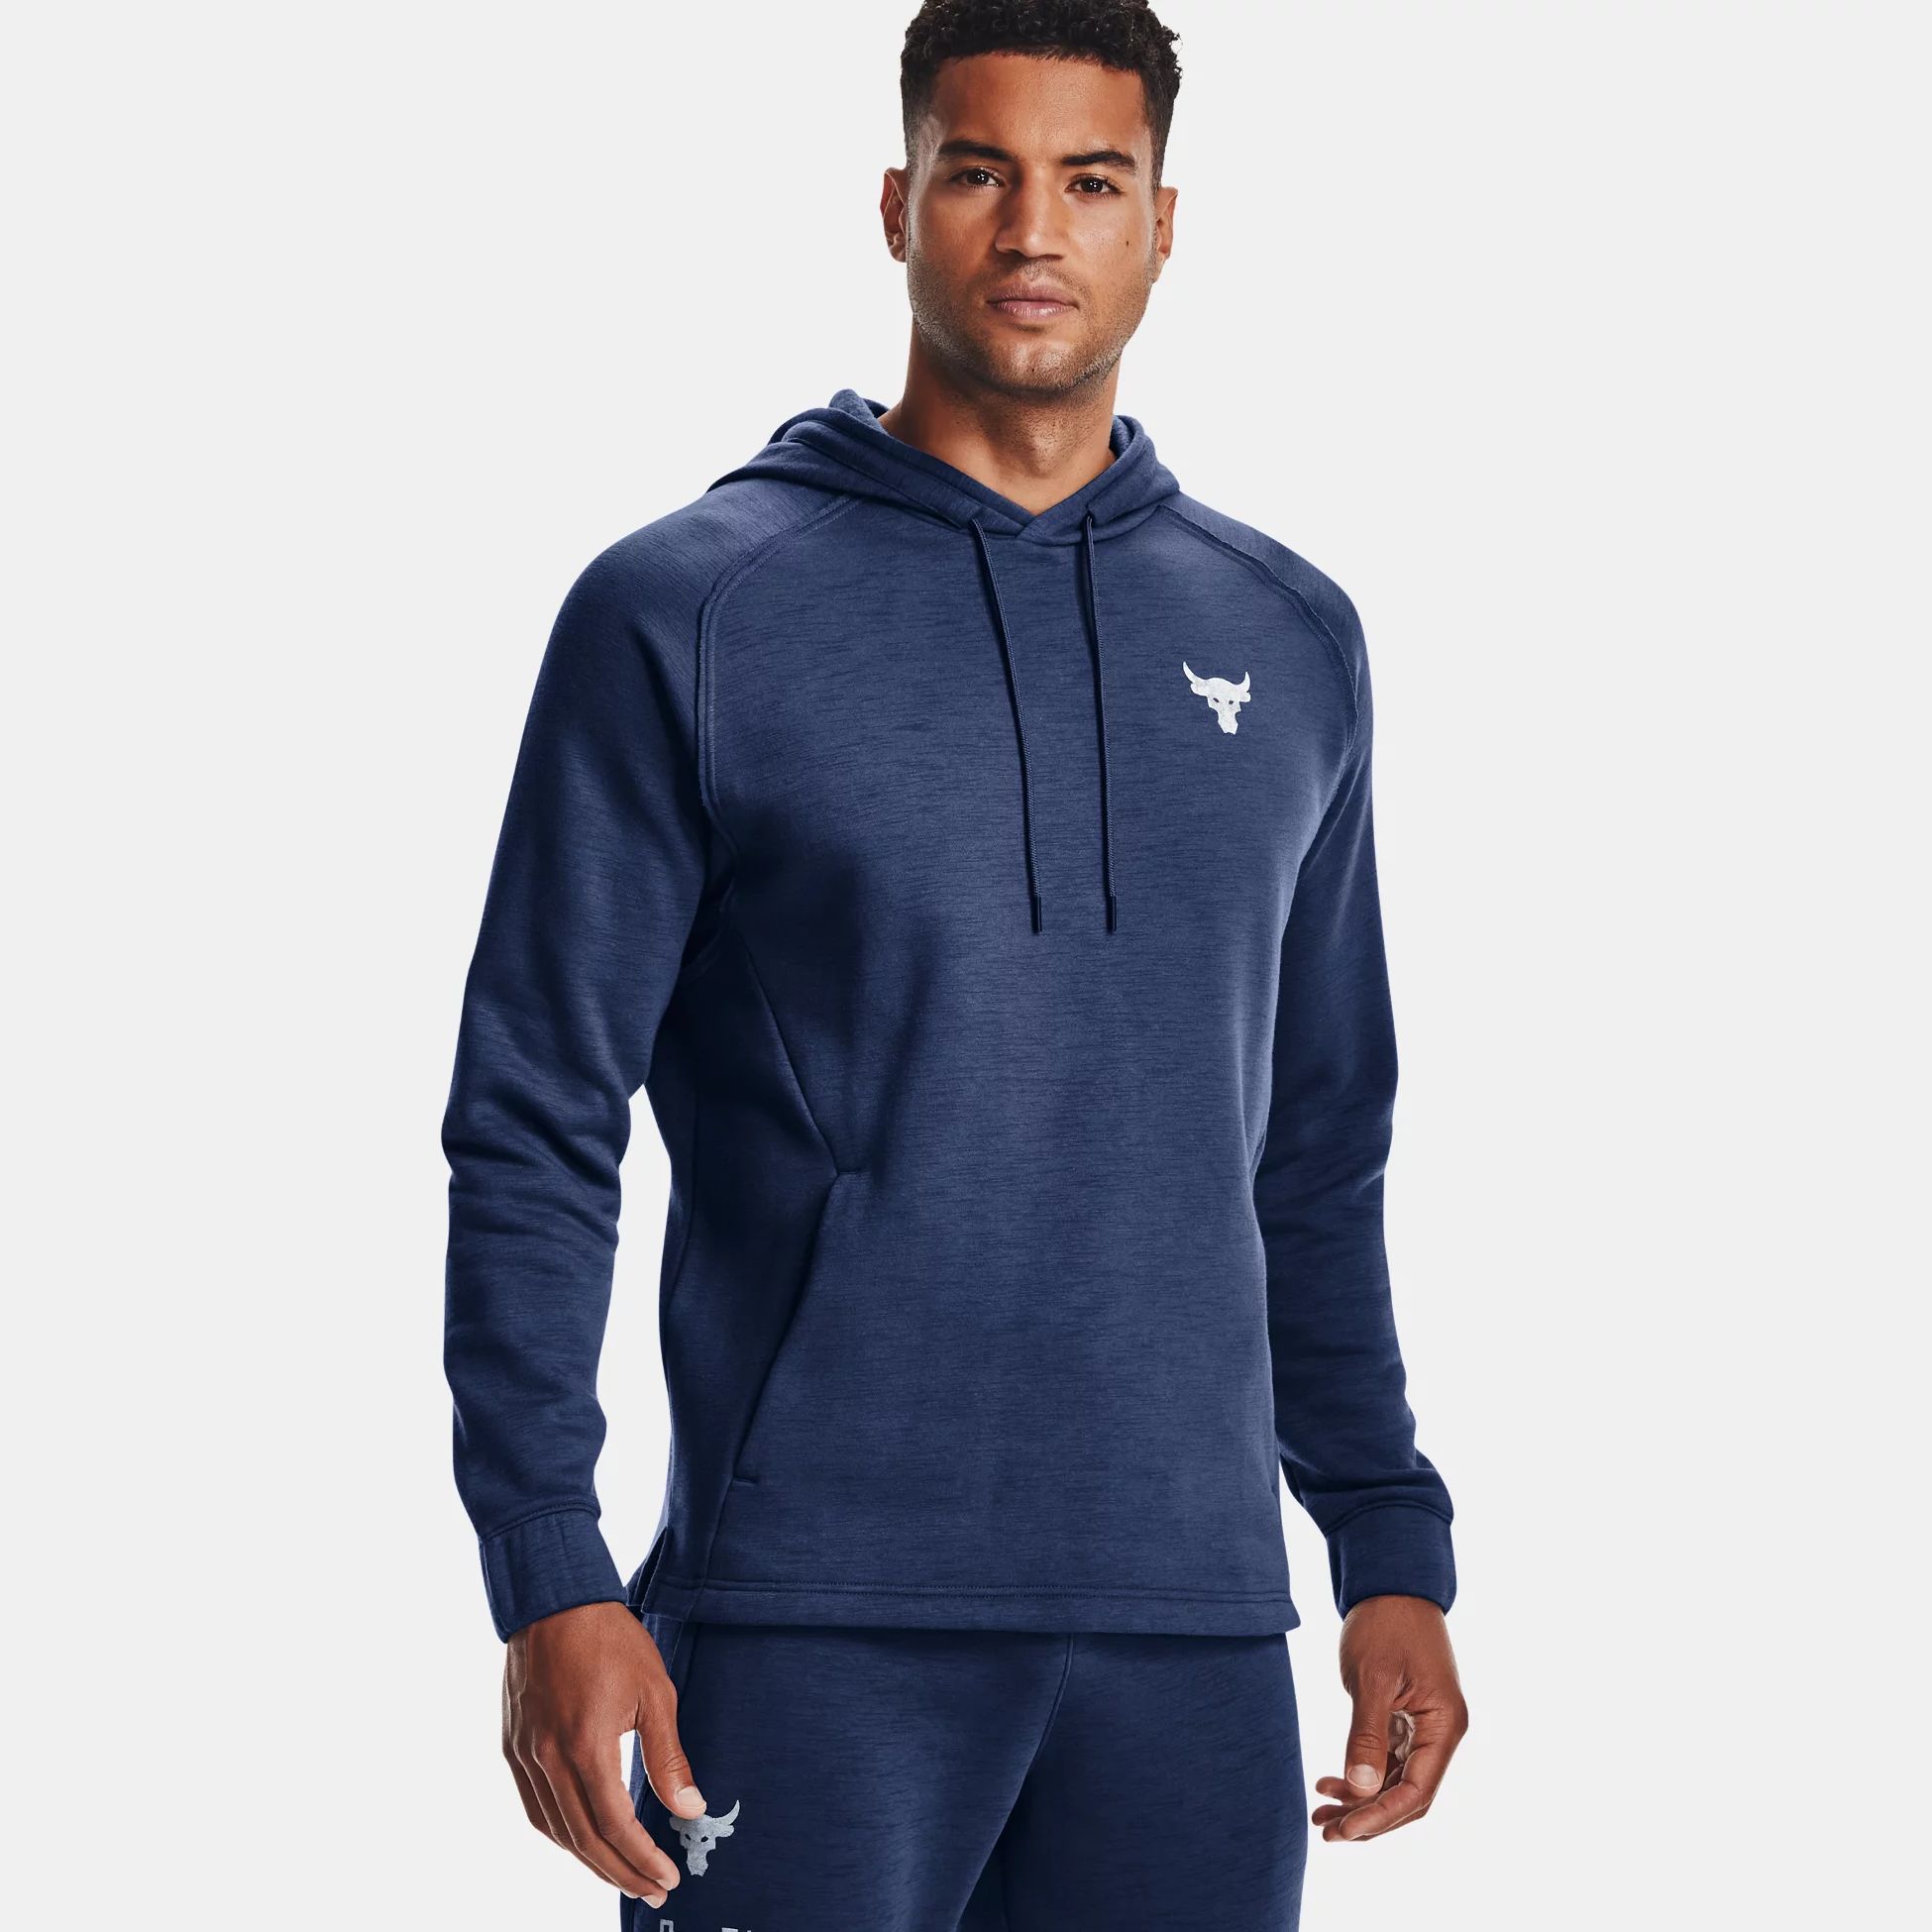 under armour cotton hoodie OFF 79%